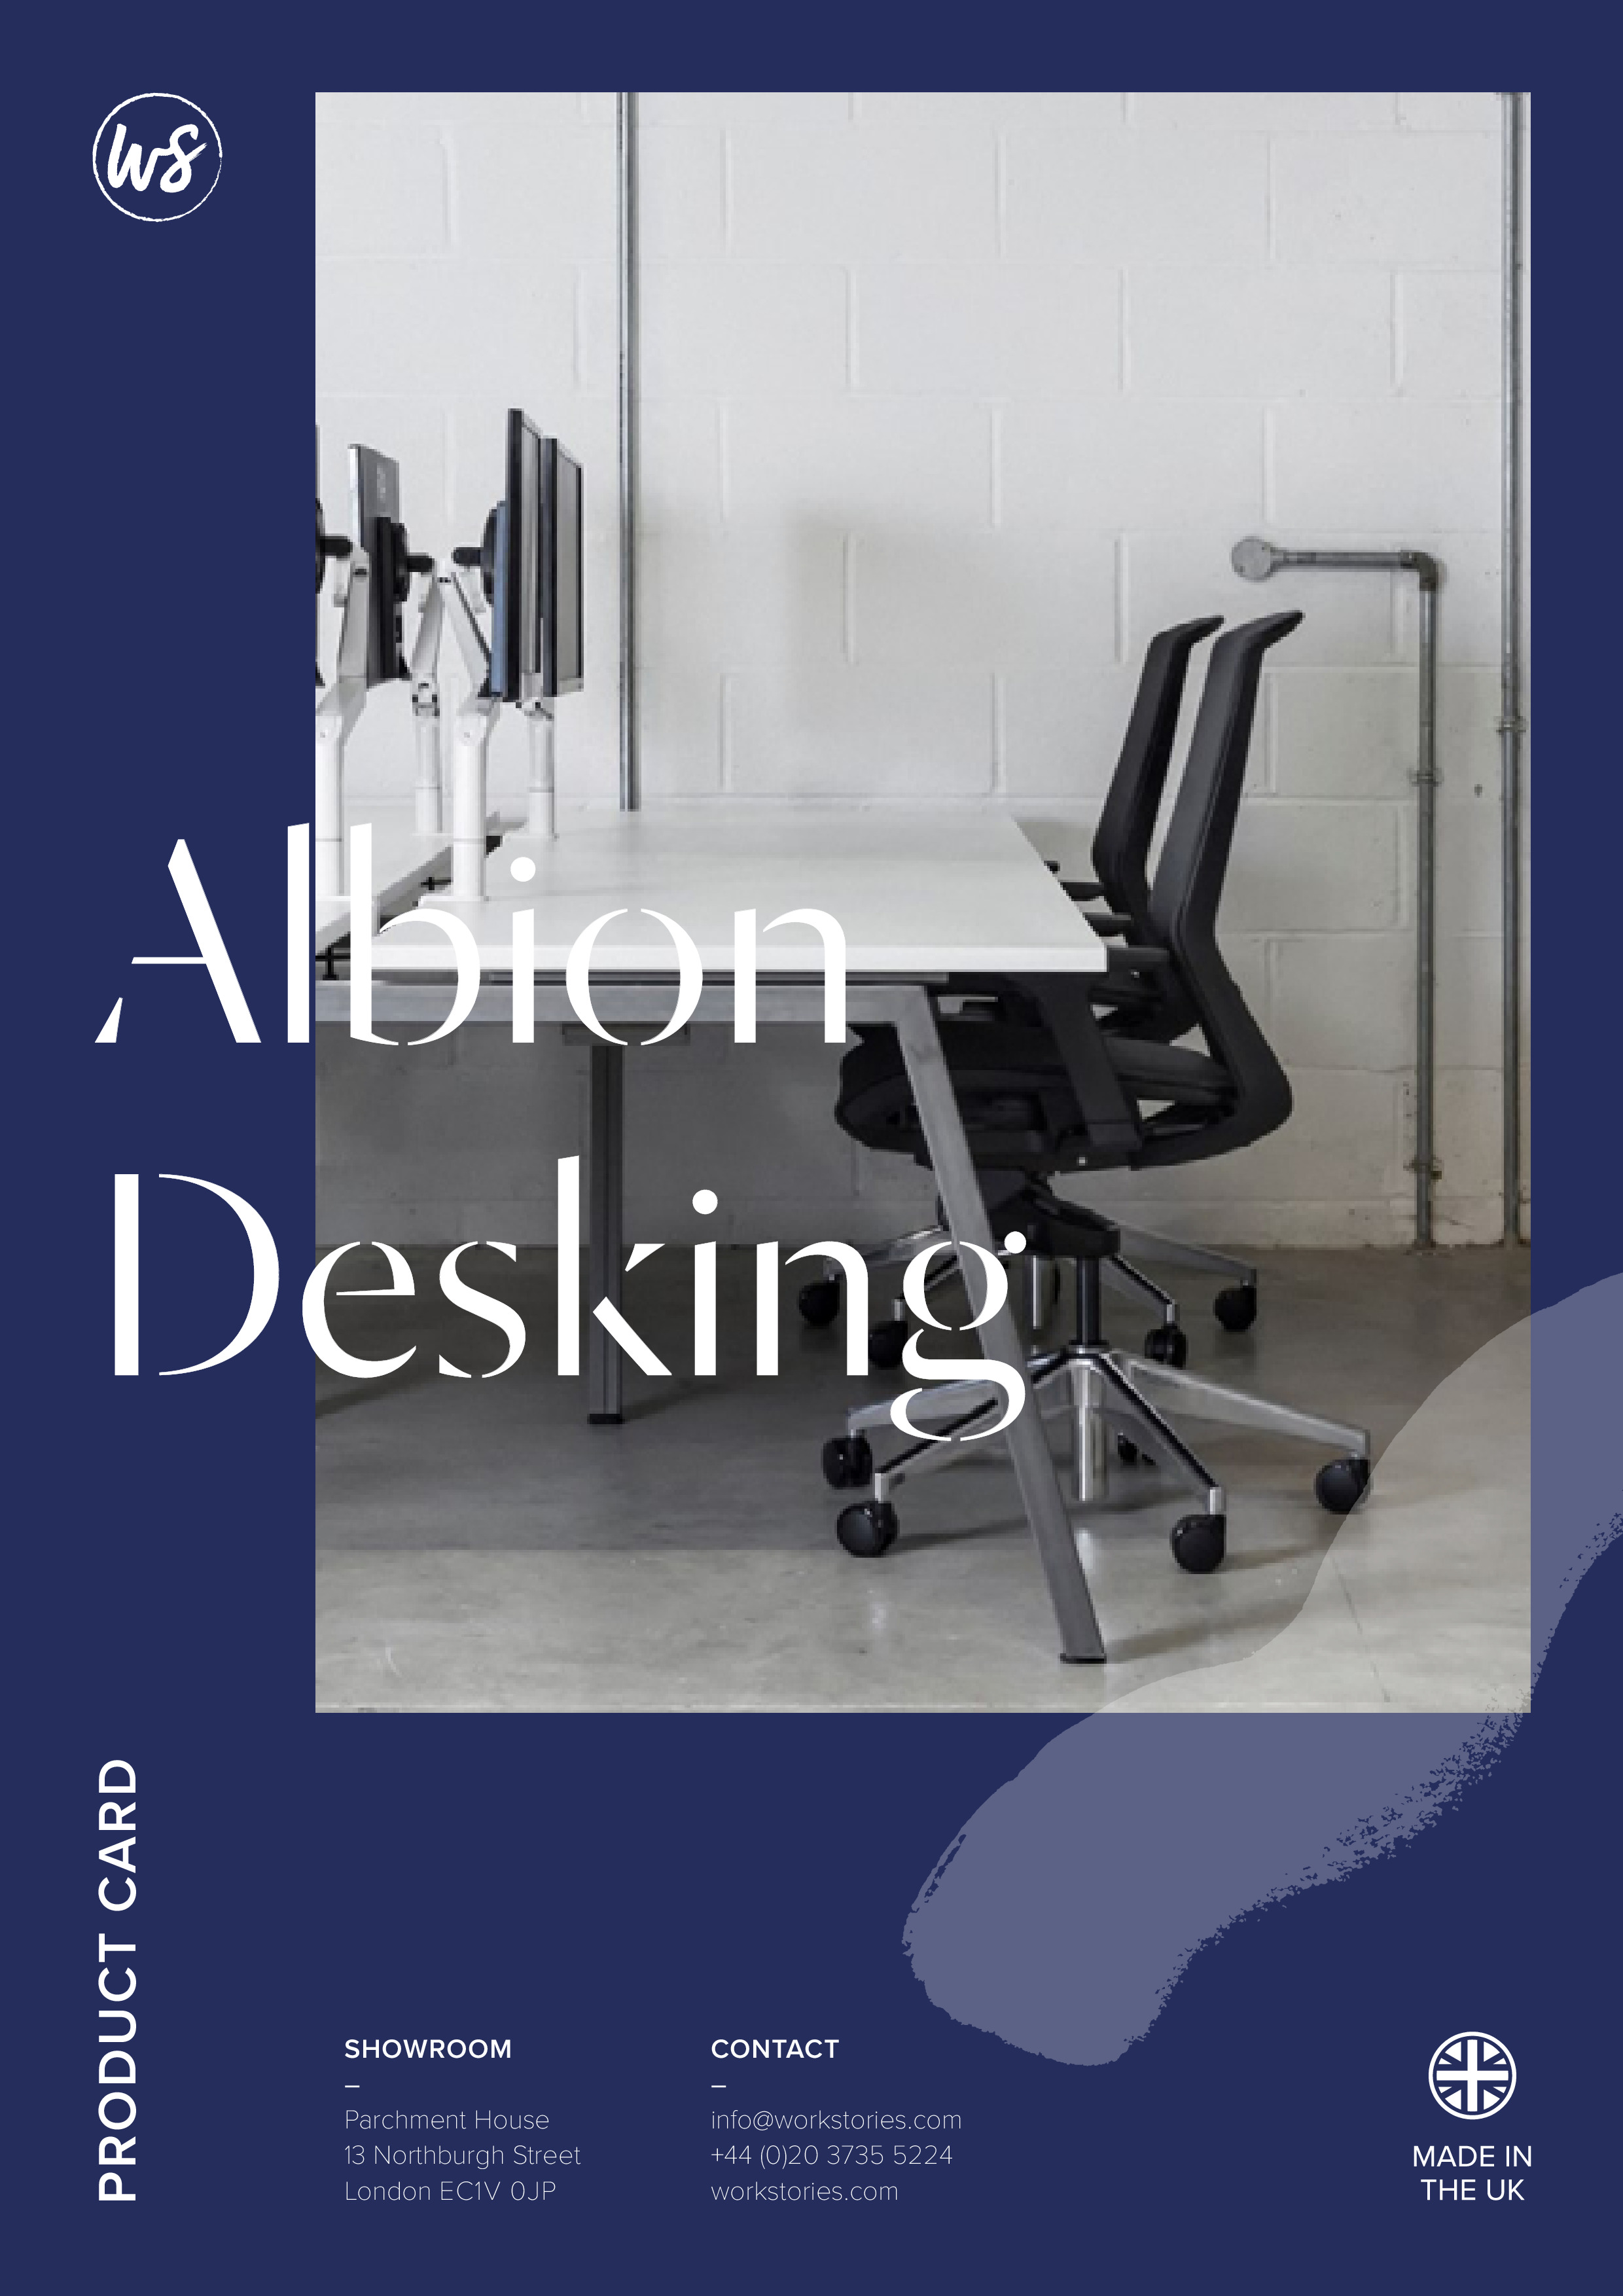 WS - Albion Desking - Product card